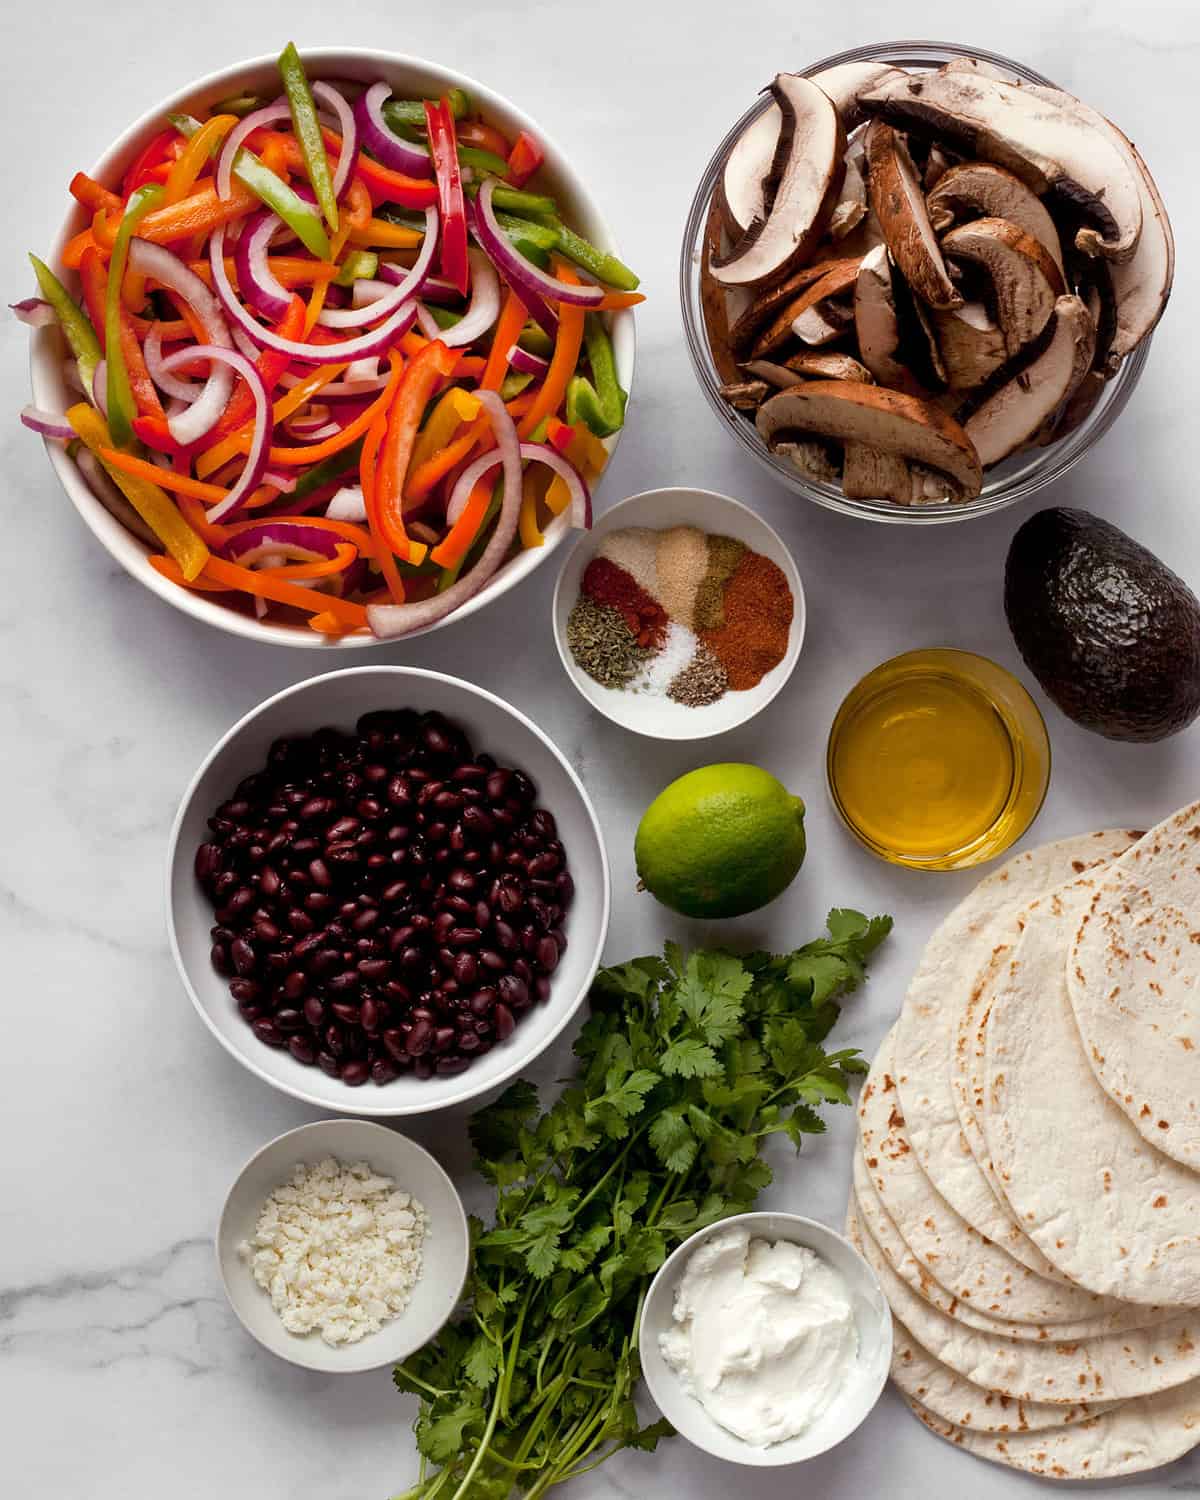 Ingredients including, peppeps, onion, portobello mushrooms, beans, cilantro, lime, tortillas and cheese.